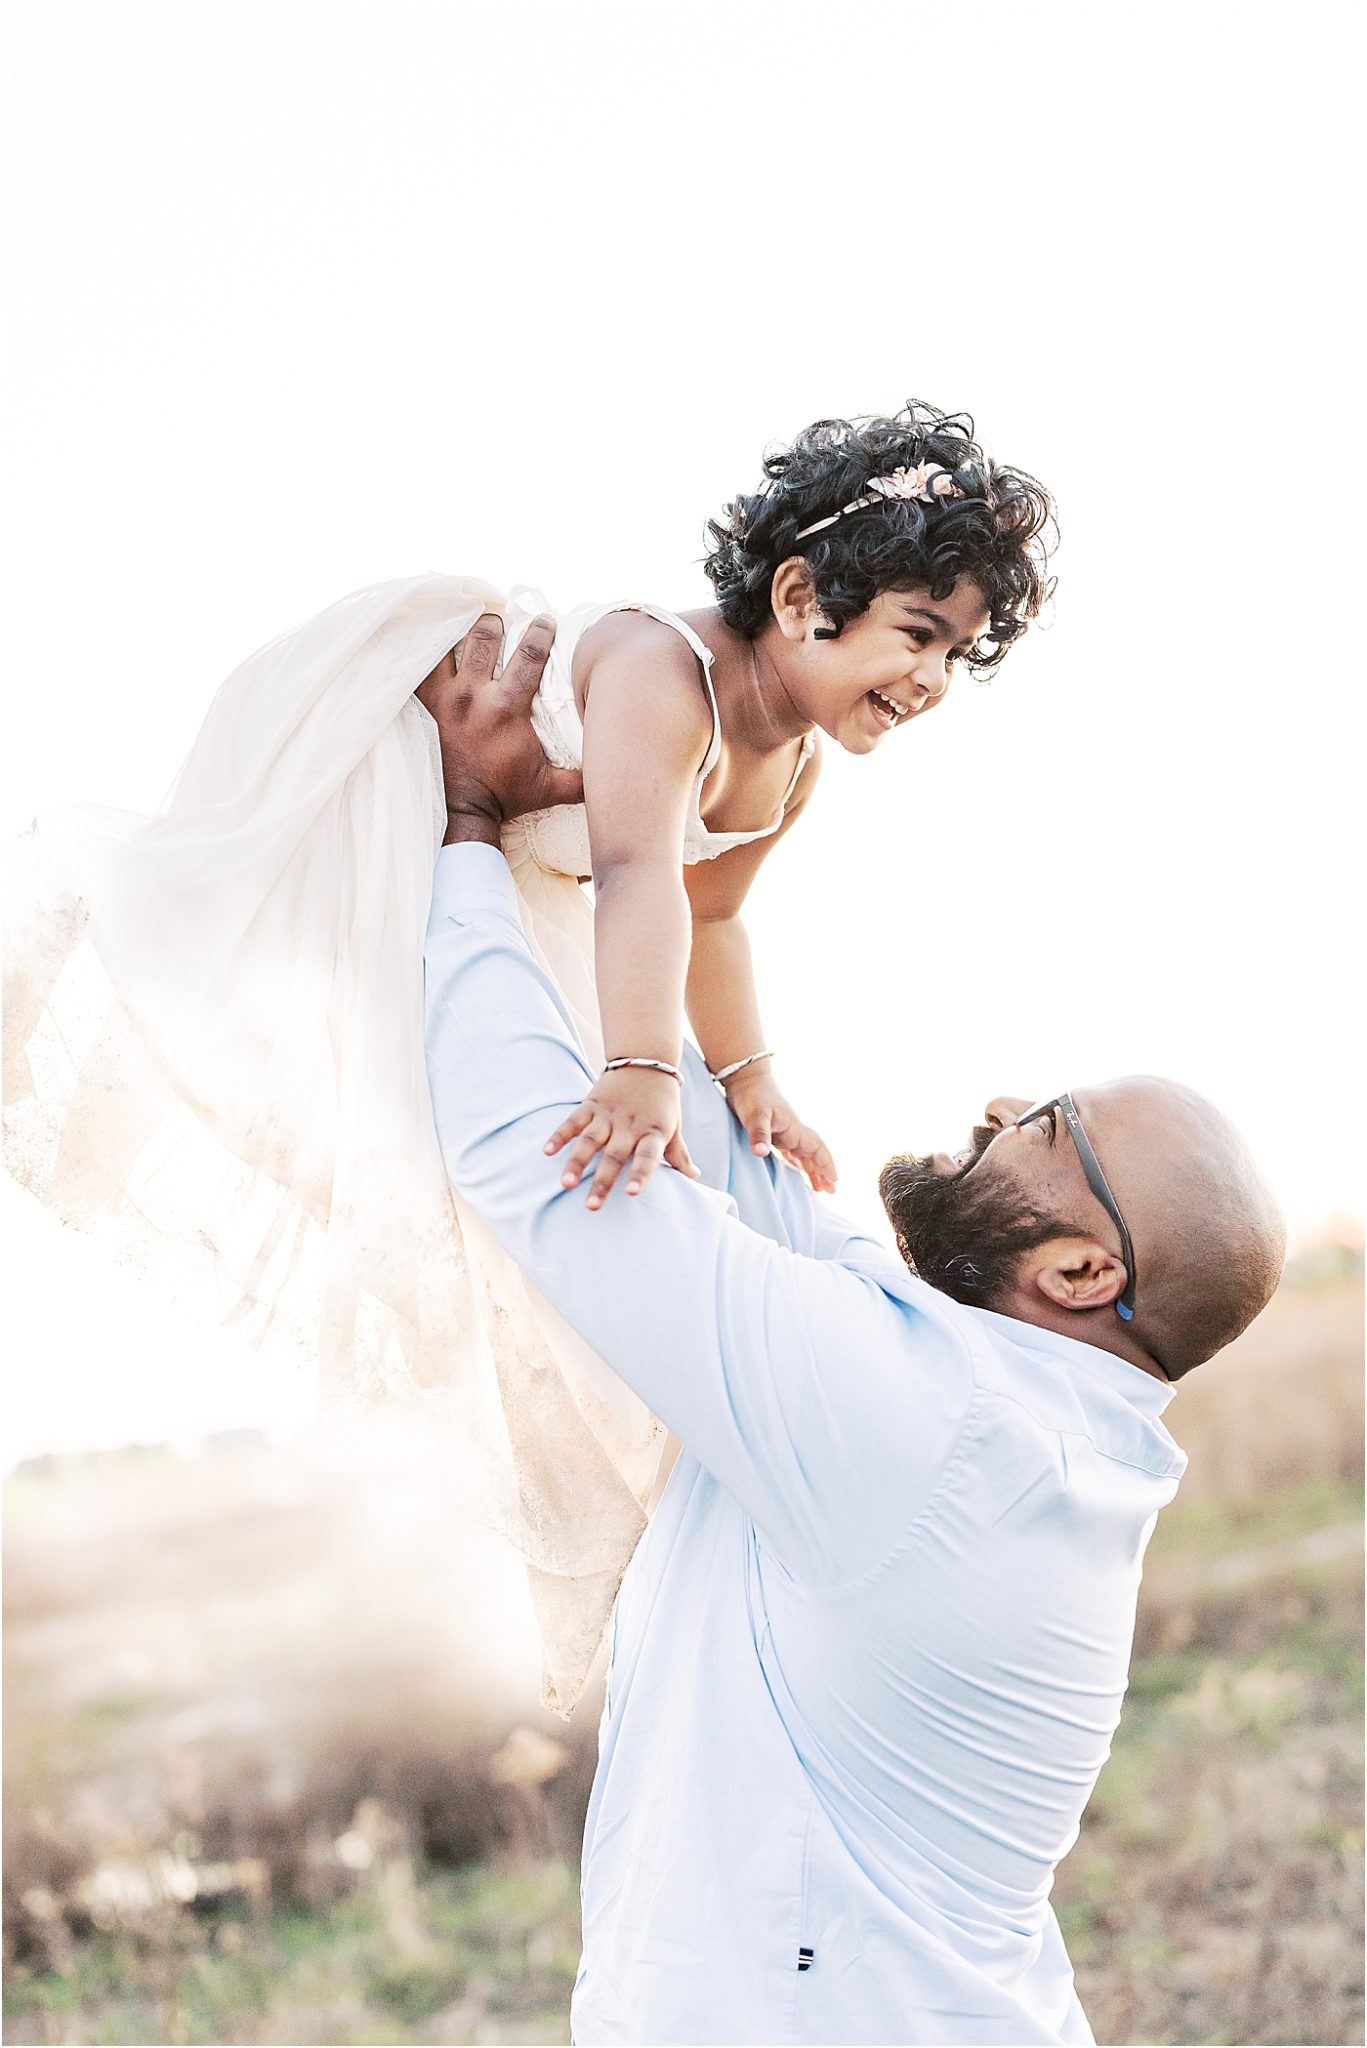 Daddy playing airplane with his daughter during family photoshoot. Photo by Lindsay Konopa Photography.